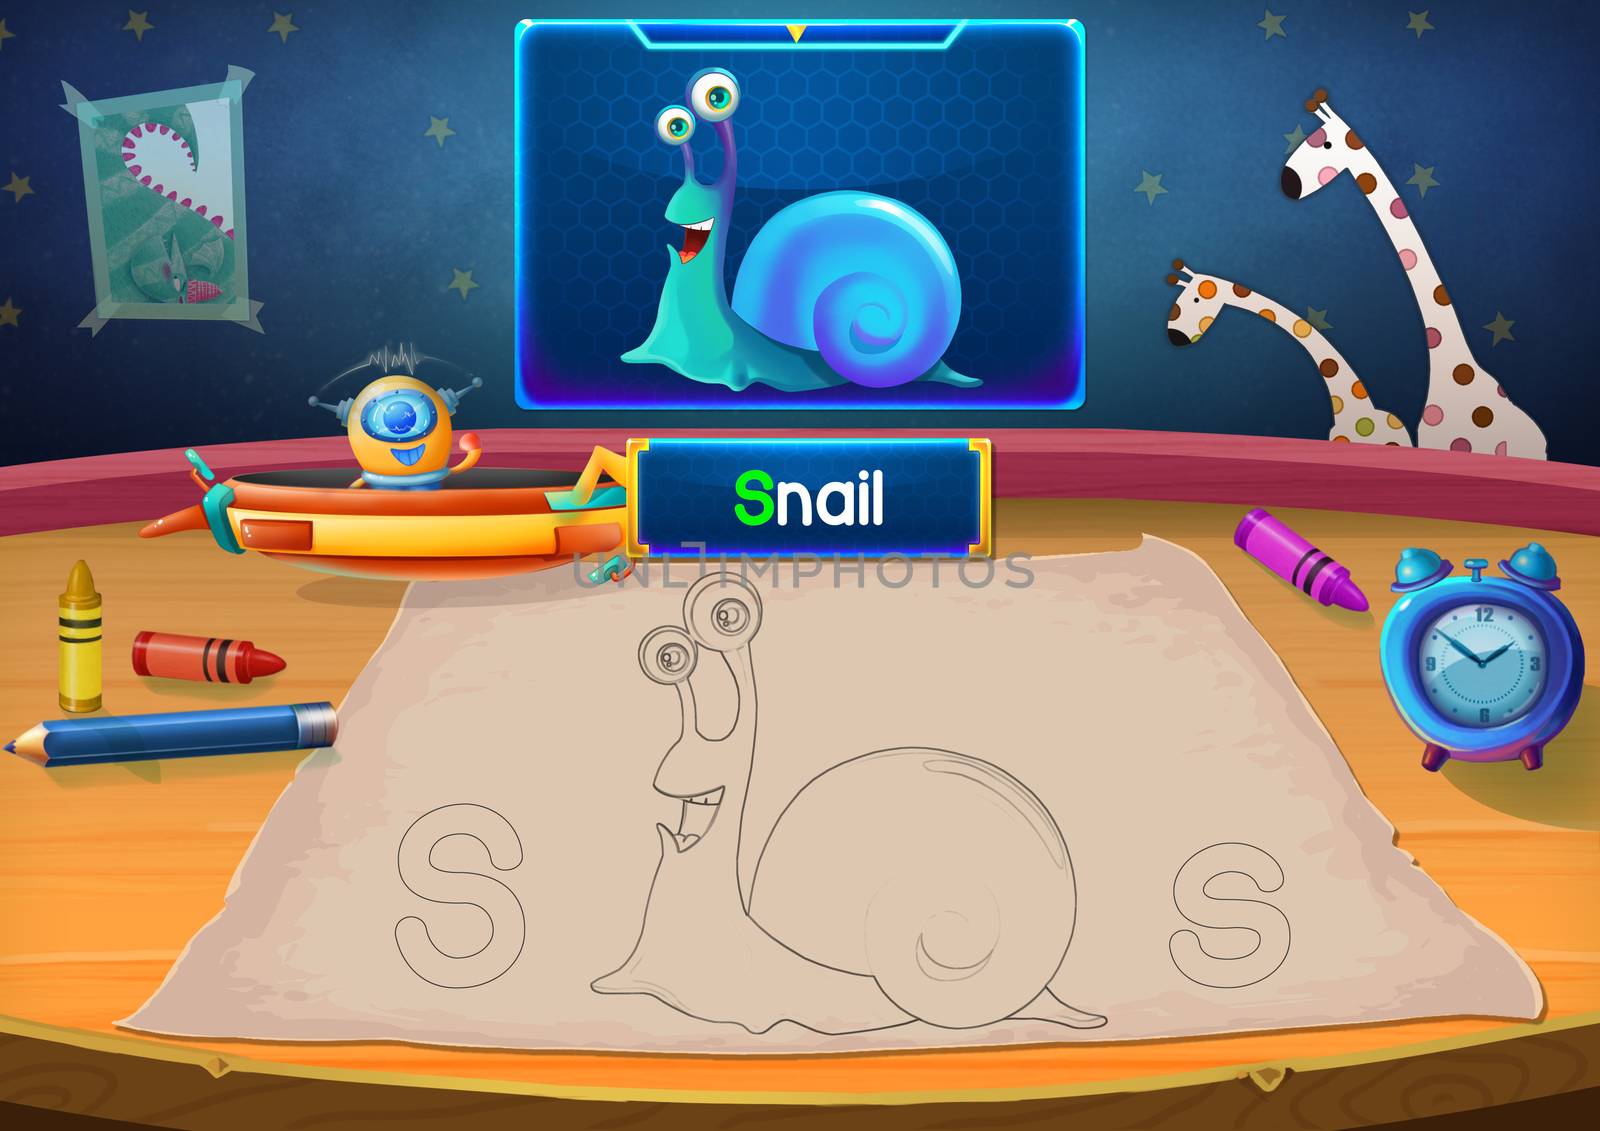 Illustration: Martian Class: S - Snail. The Martian in this picture opens a class for all Aliens. You must follow and use crayons coloring the outlines below. Fantastic Sci-Fi Cartoon Scene Design.